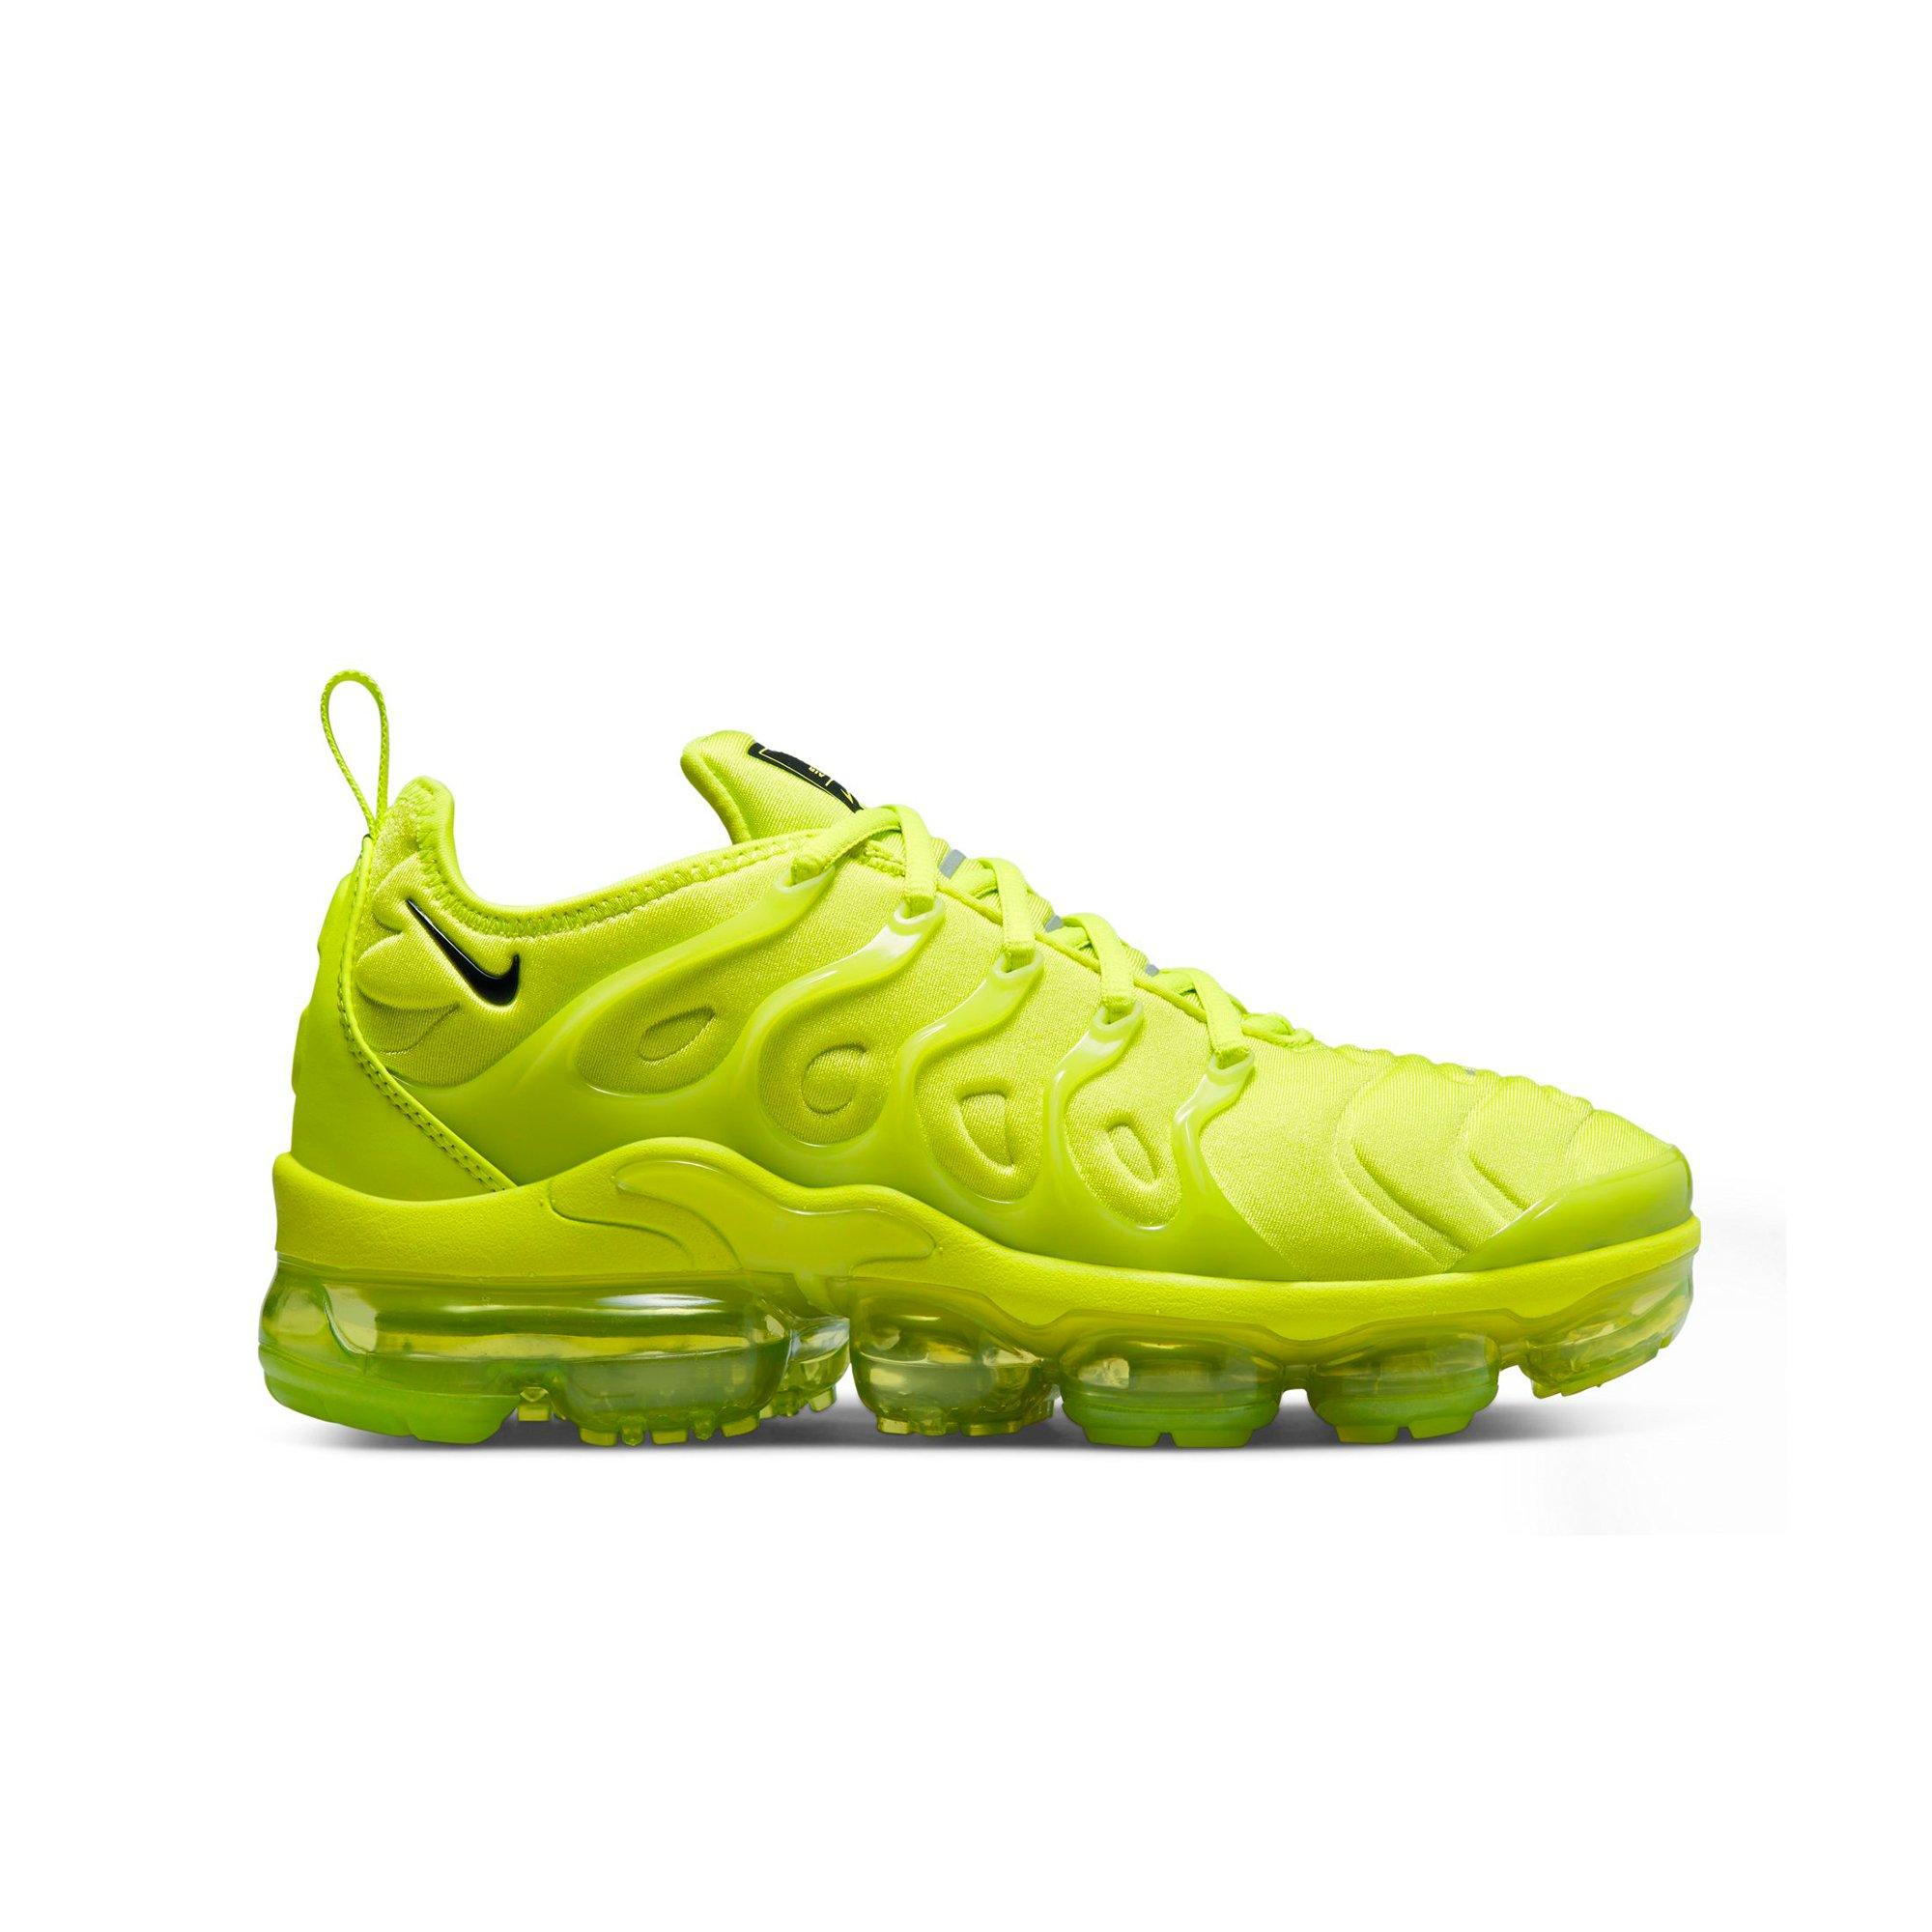 what material are vapormax plus